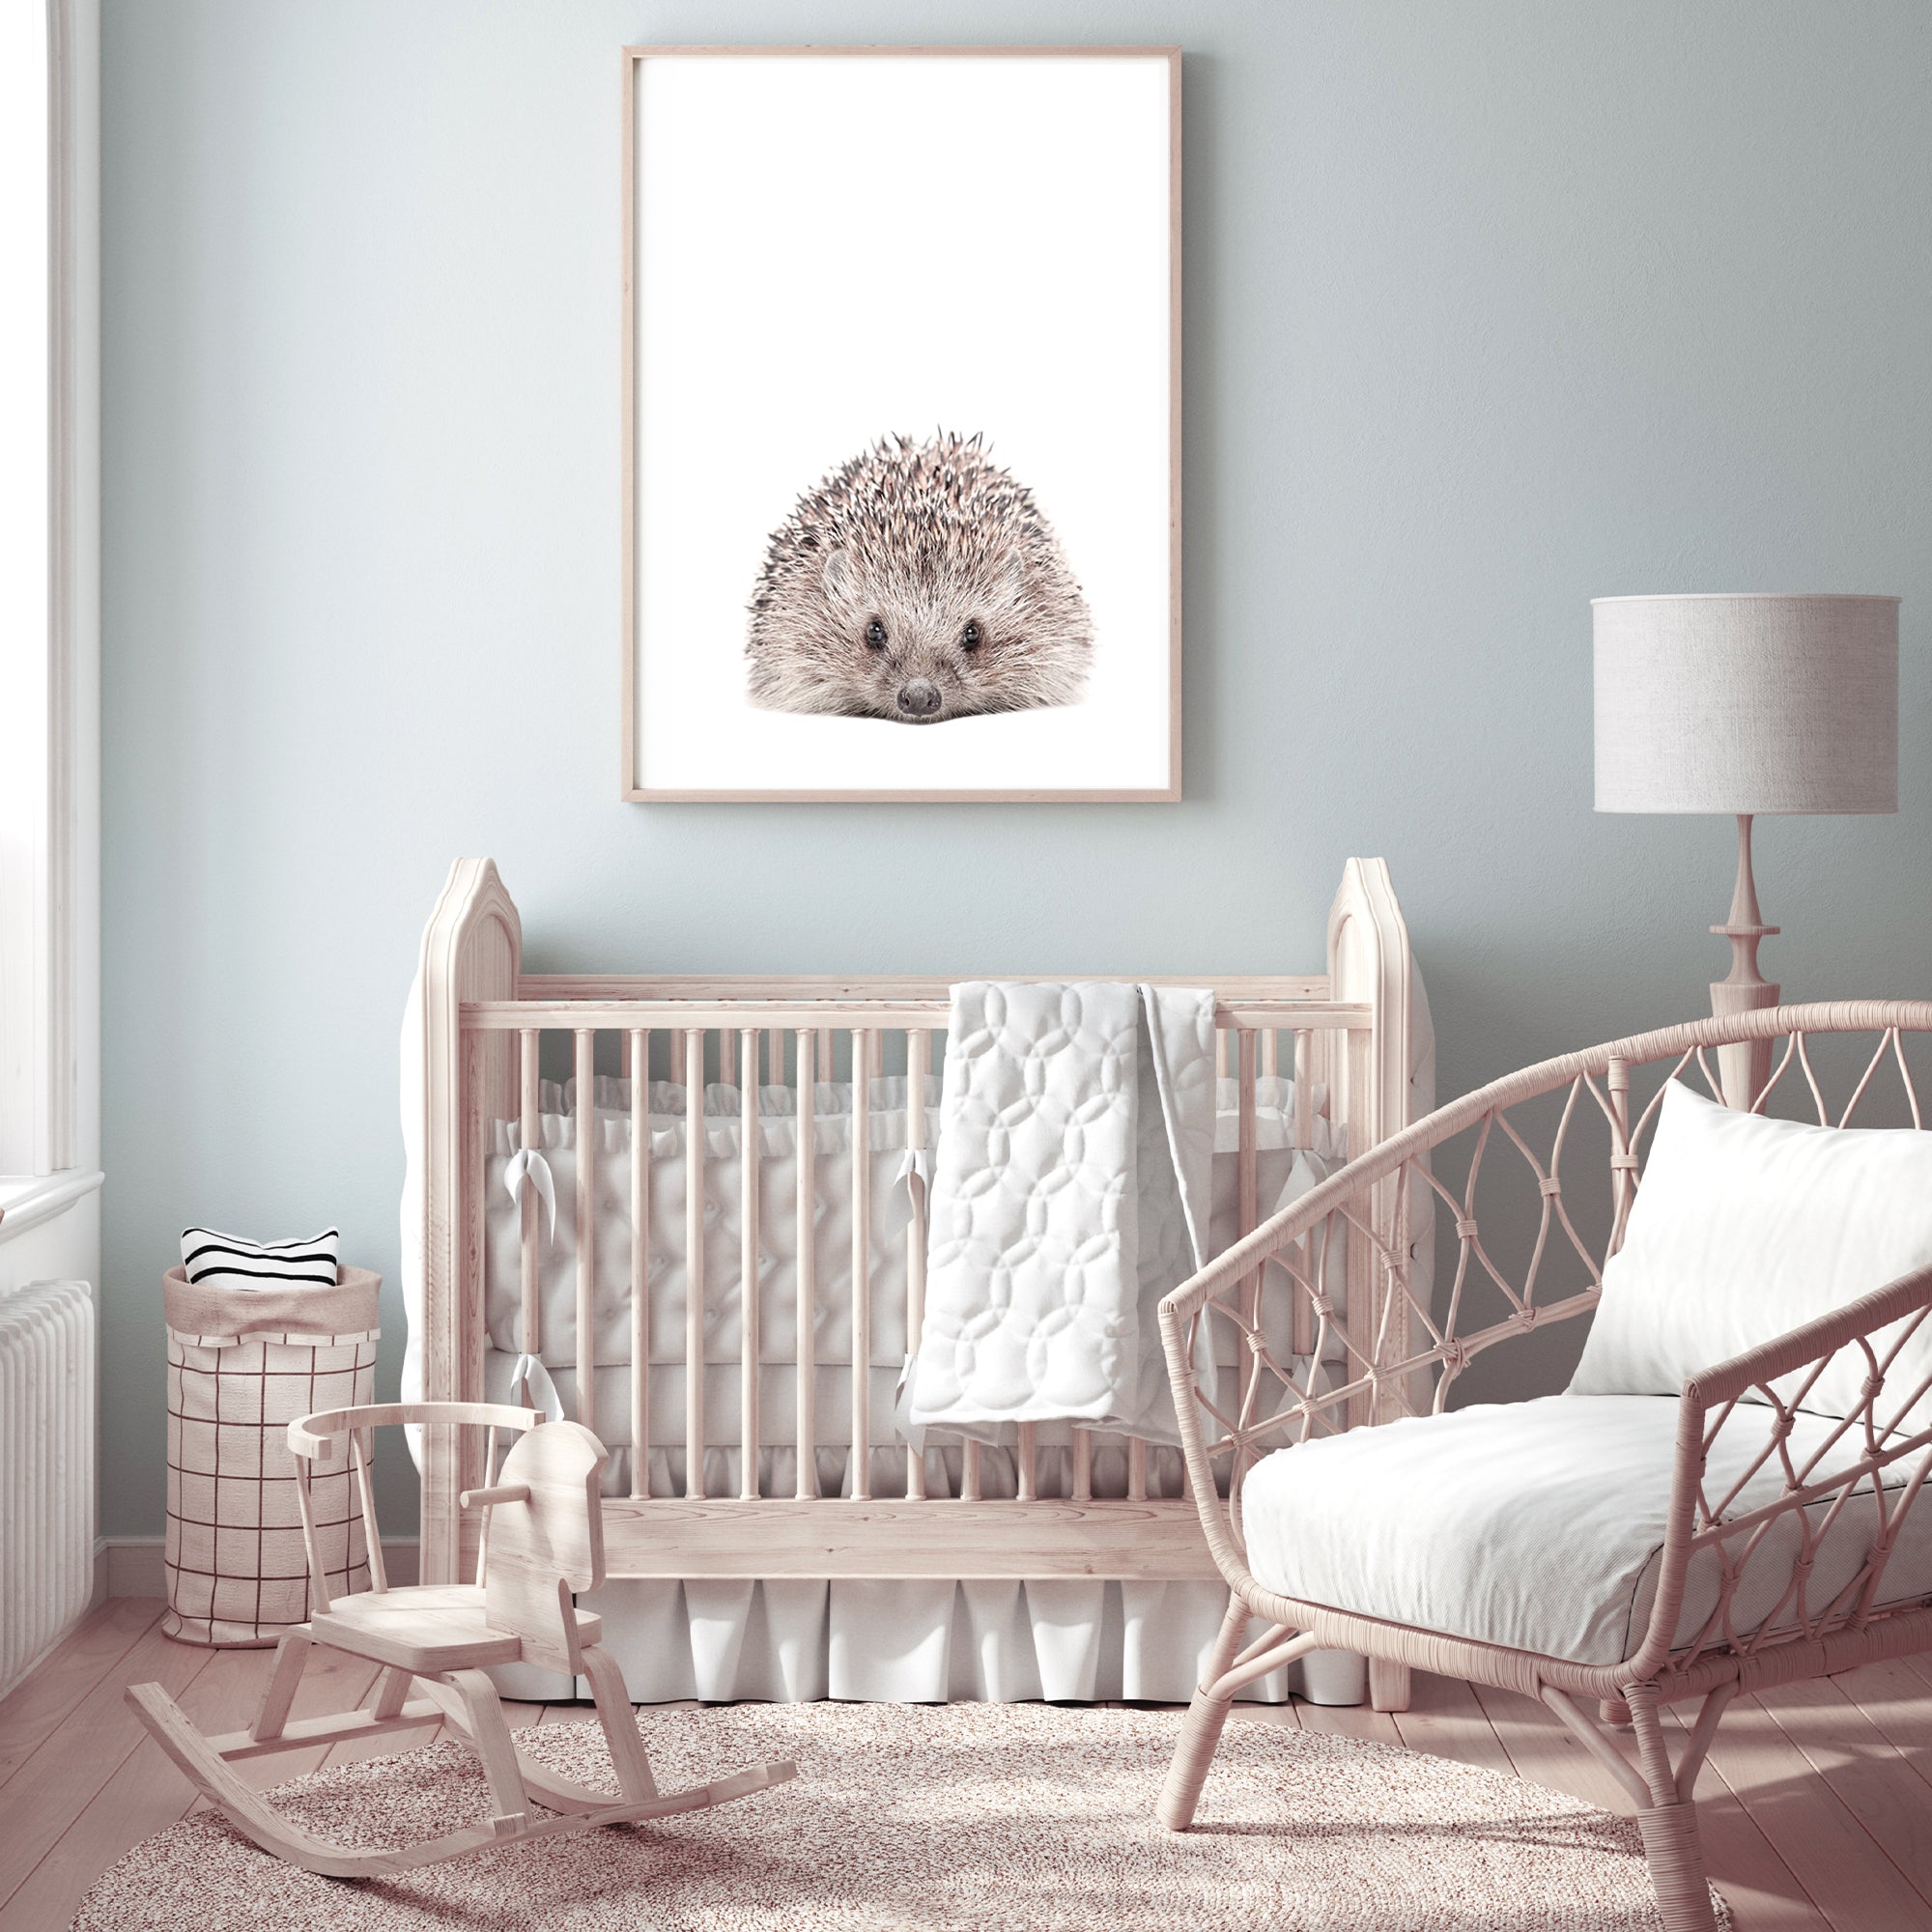 Featuring the Animal Baby Hedgehog photo art print, available in an unframed poster print, stretched canvas or with a timber, white or black frame.